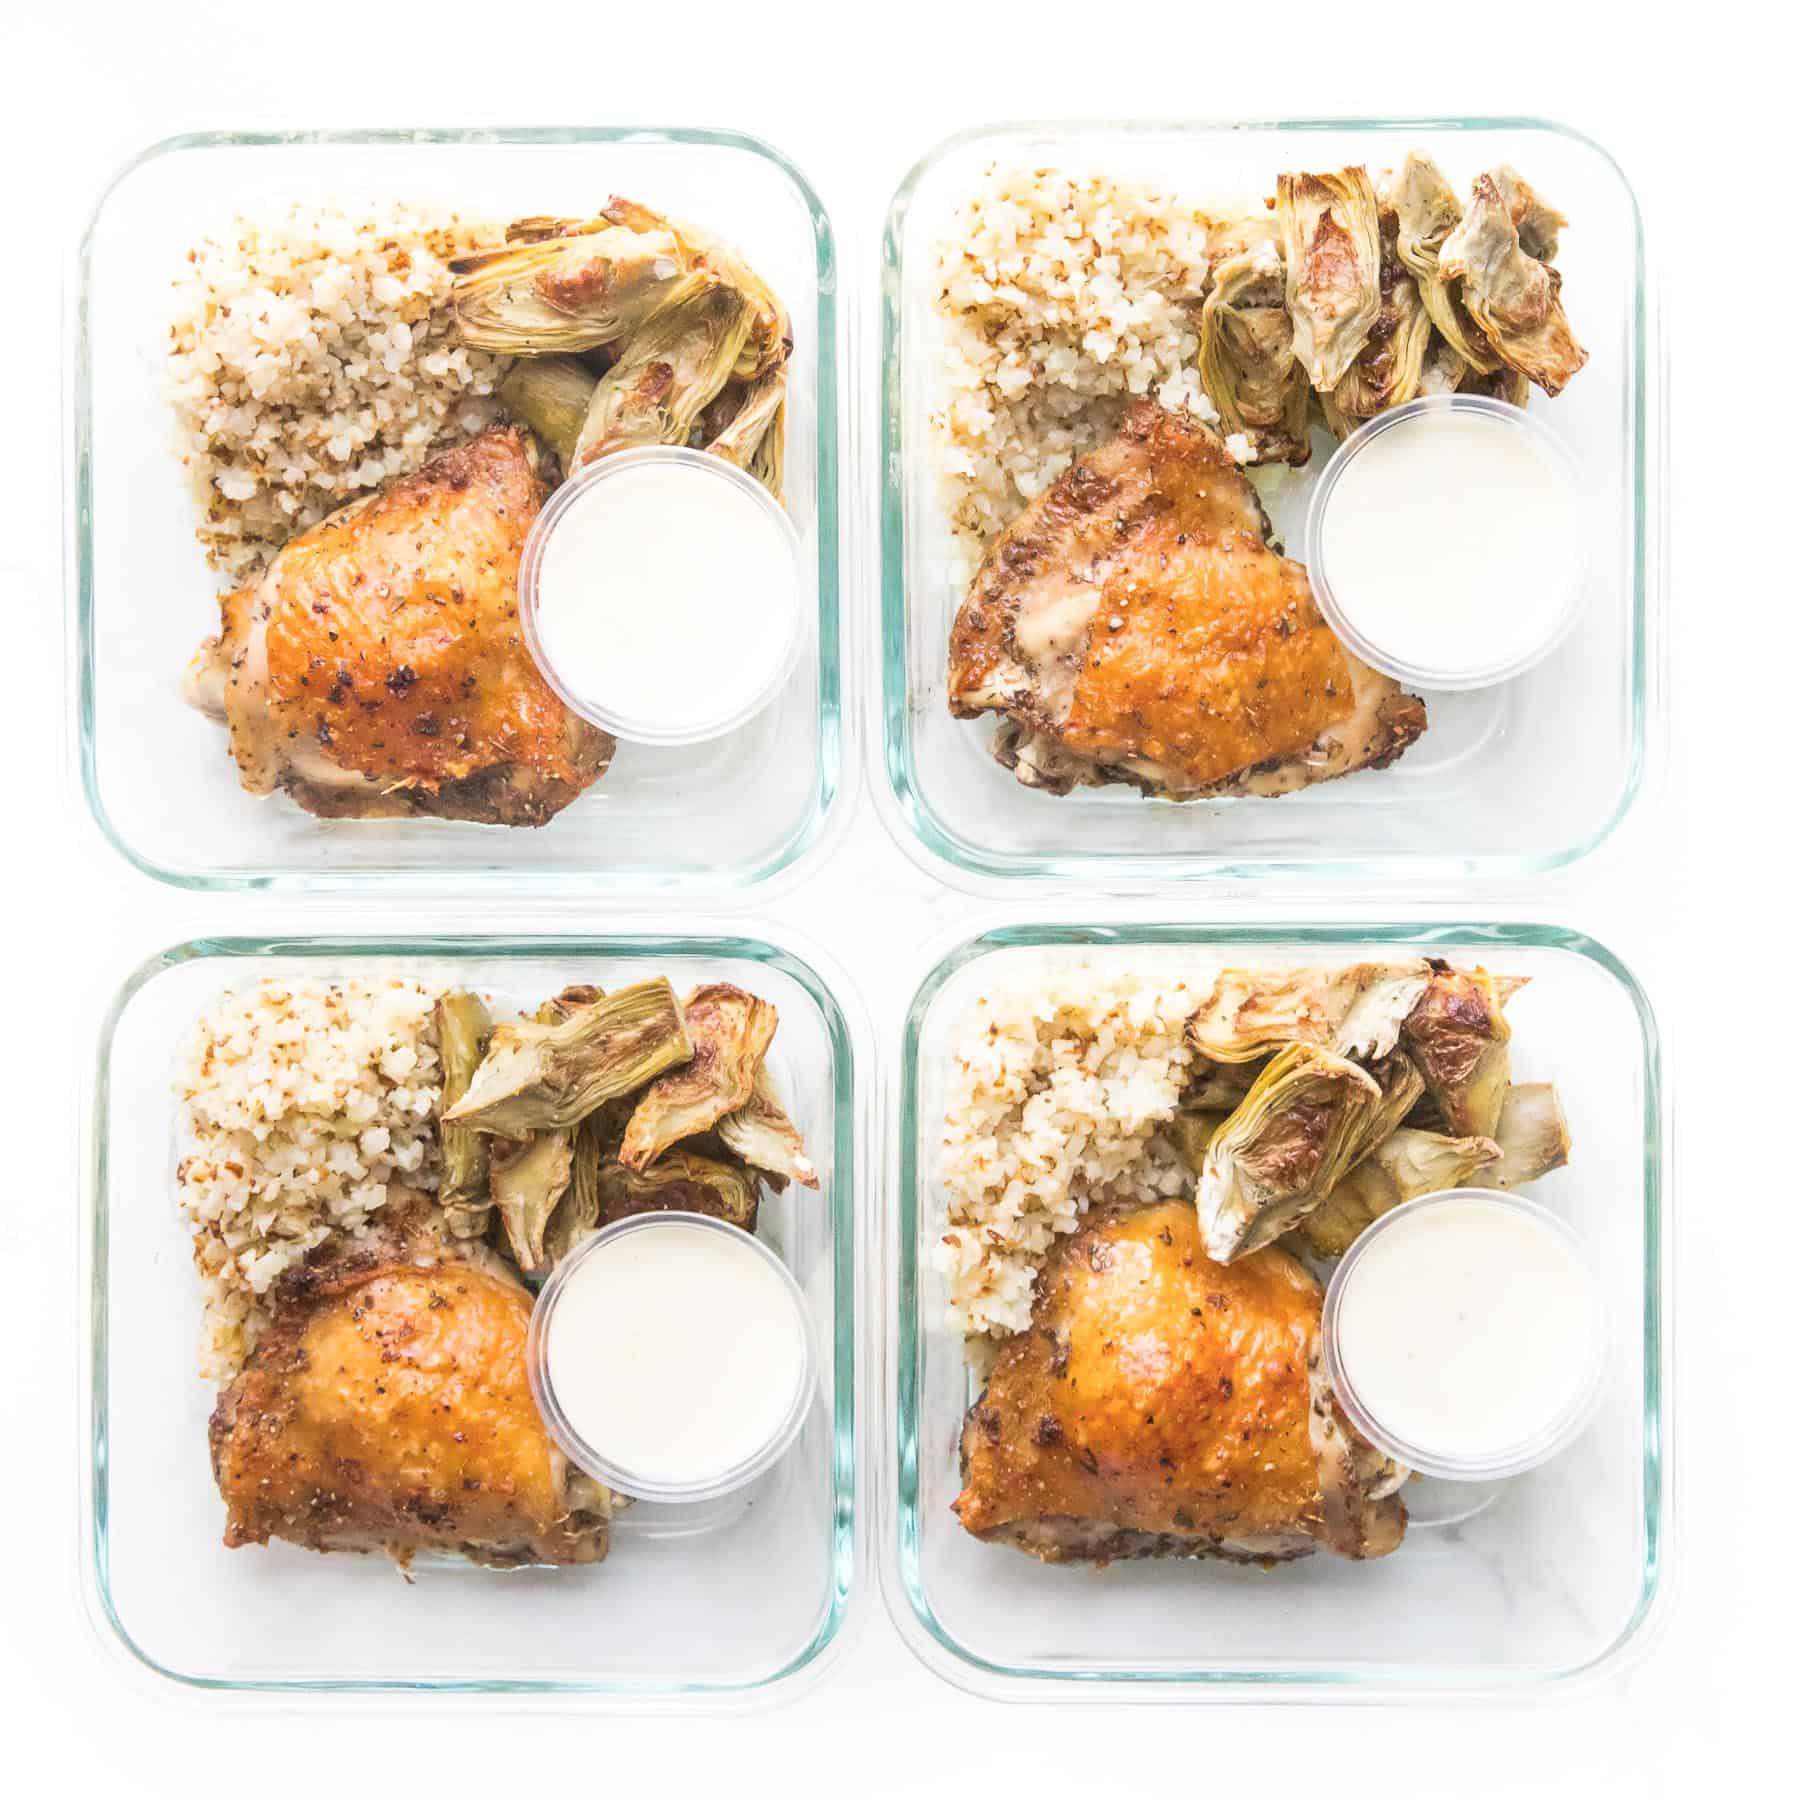 chicken thigh, artichokes and cauliflower rice in a meal prep container